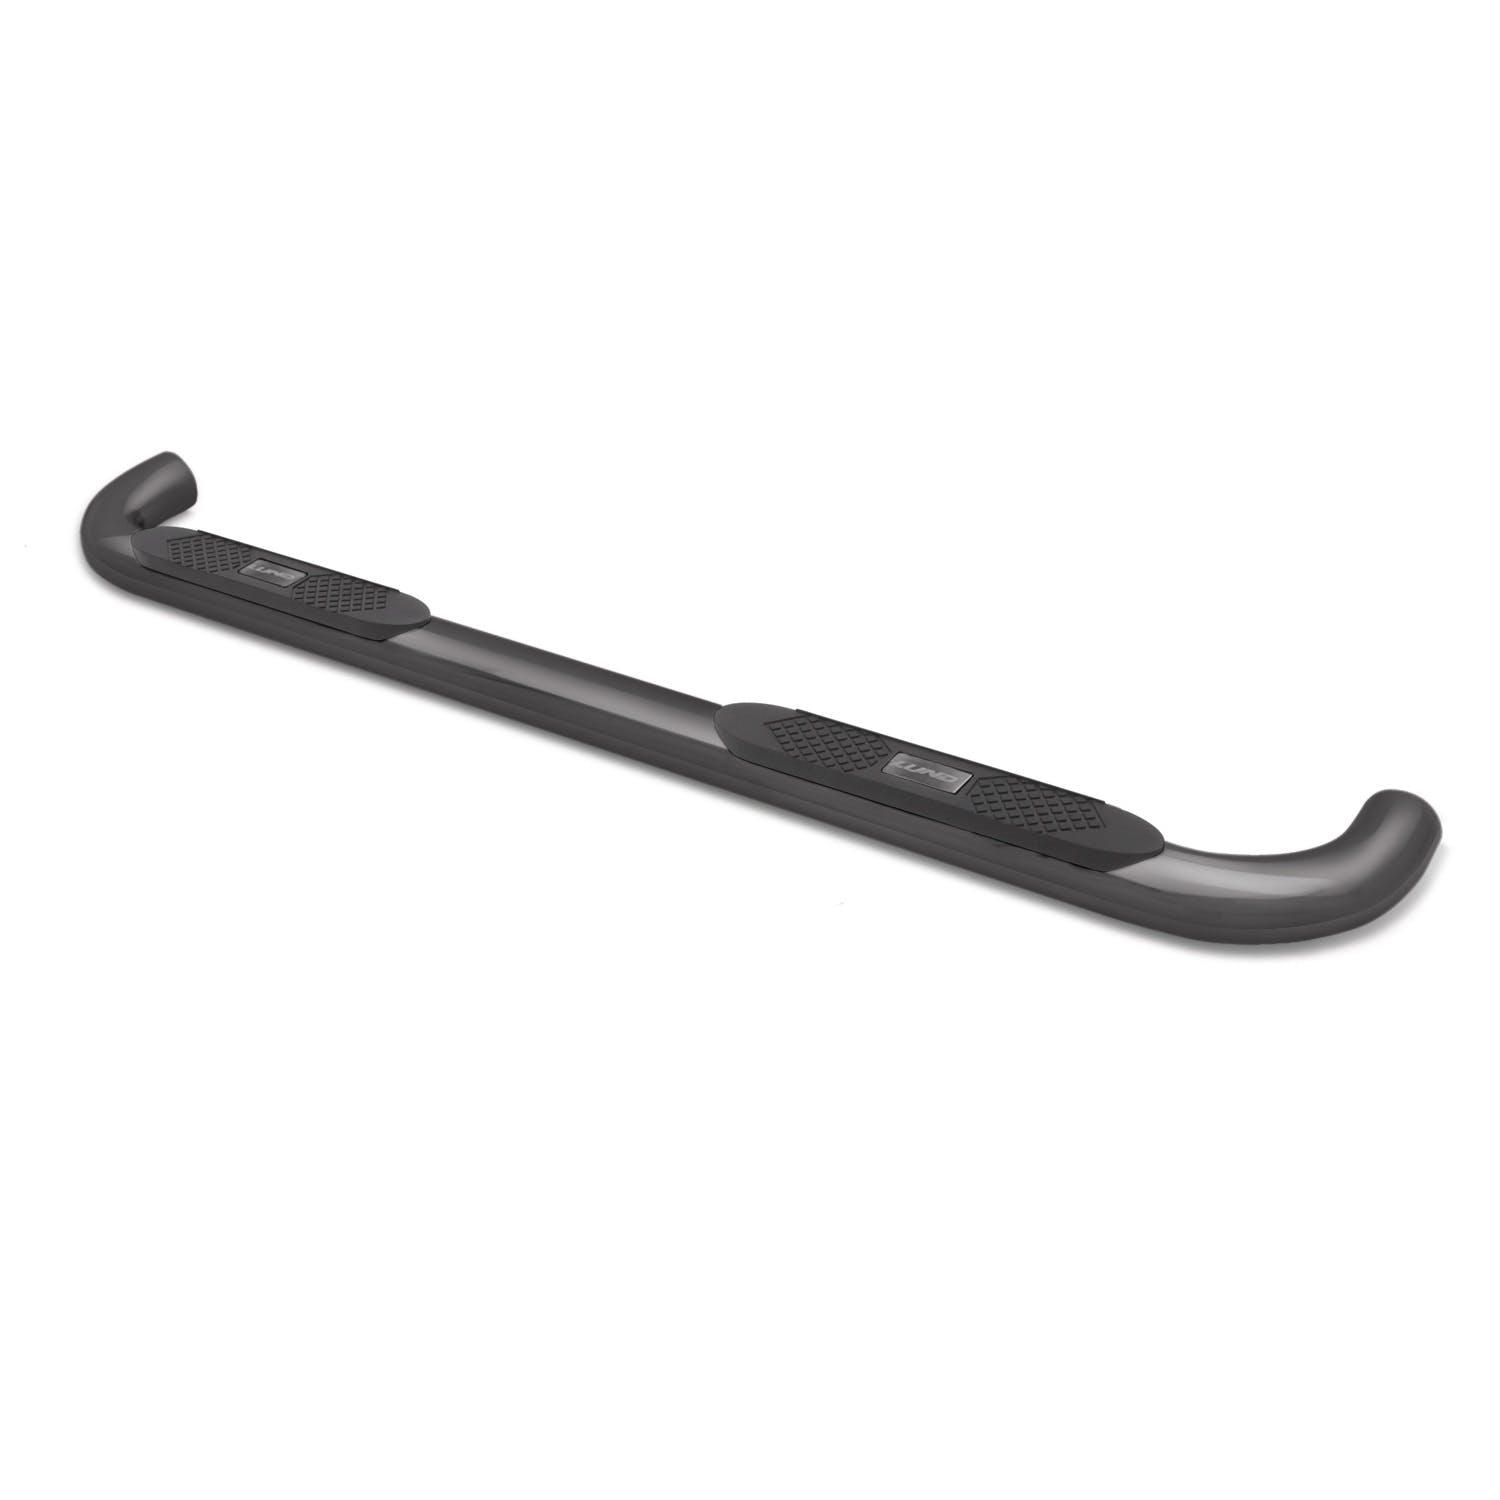 LUND 23485963 4 Inch Oval Curved Nerf Bar - Black 4 In OVAL CURVED STEEL